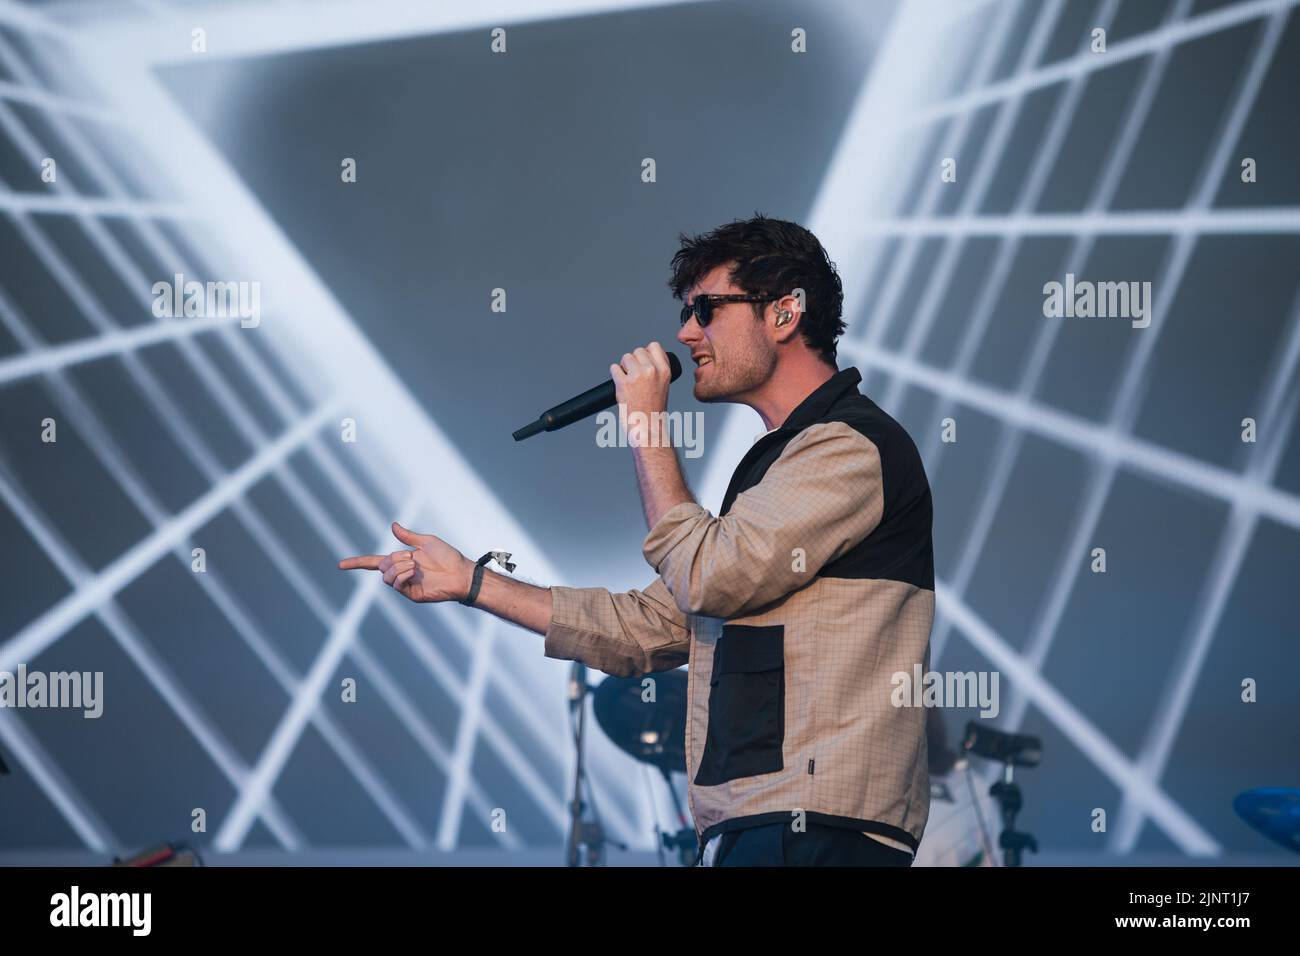 Newquay, Cornwall, UK. 13th August, 2022. Bastille performing on main stage at Boardmasters Festival 2022. Credit: Sam Hardwick/Alamy. Stock Photo